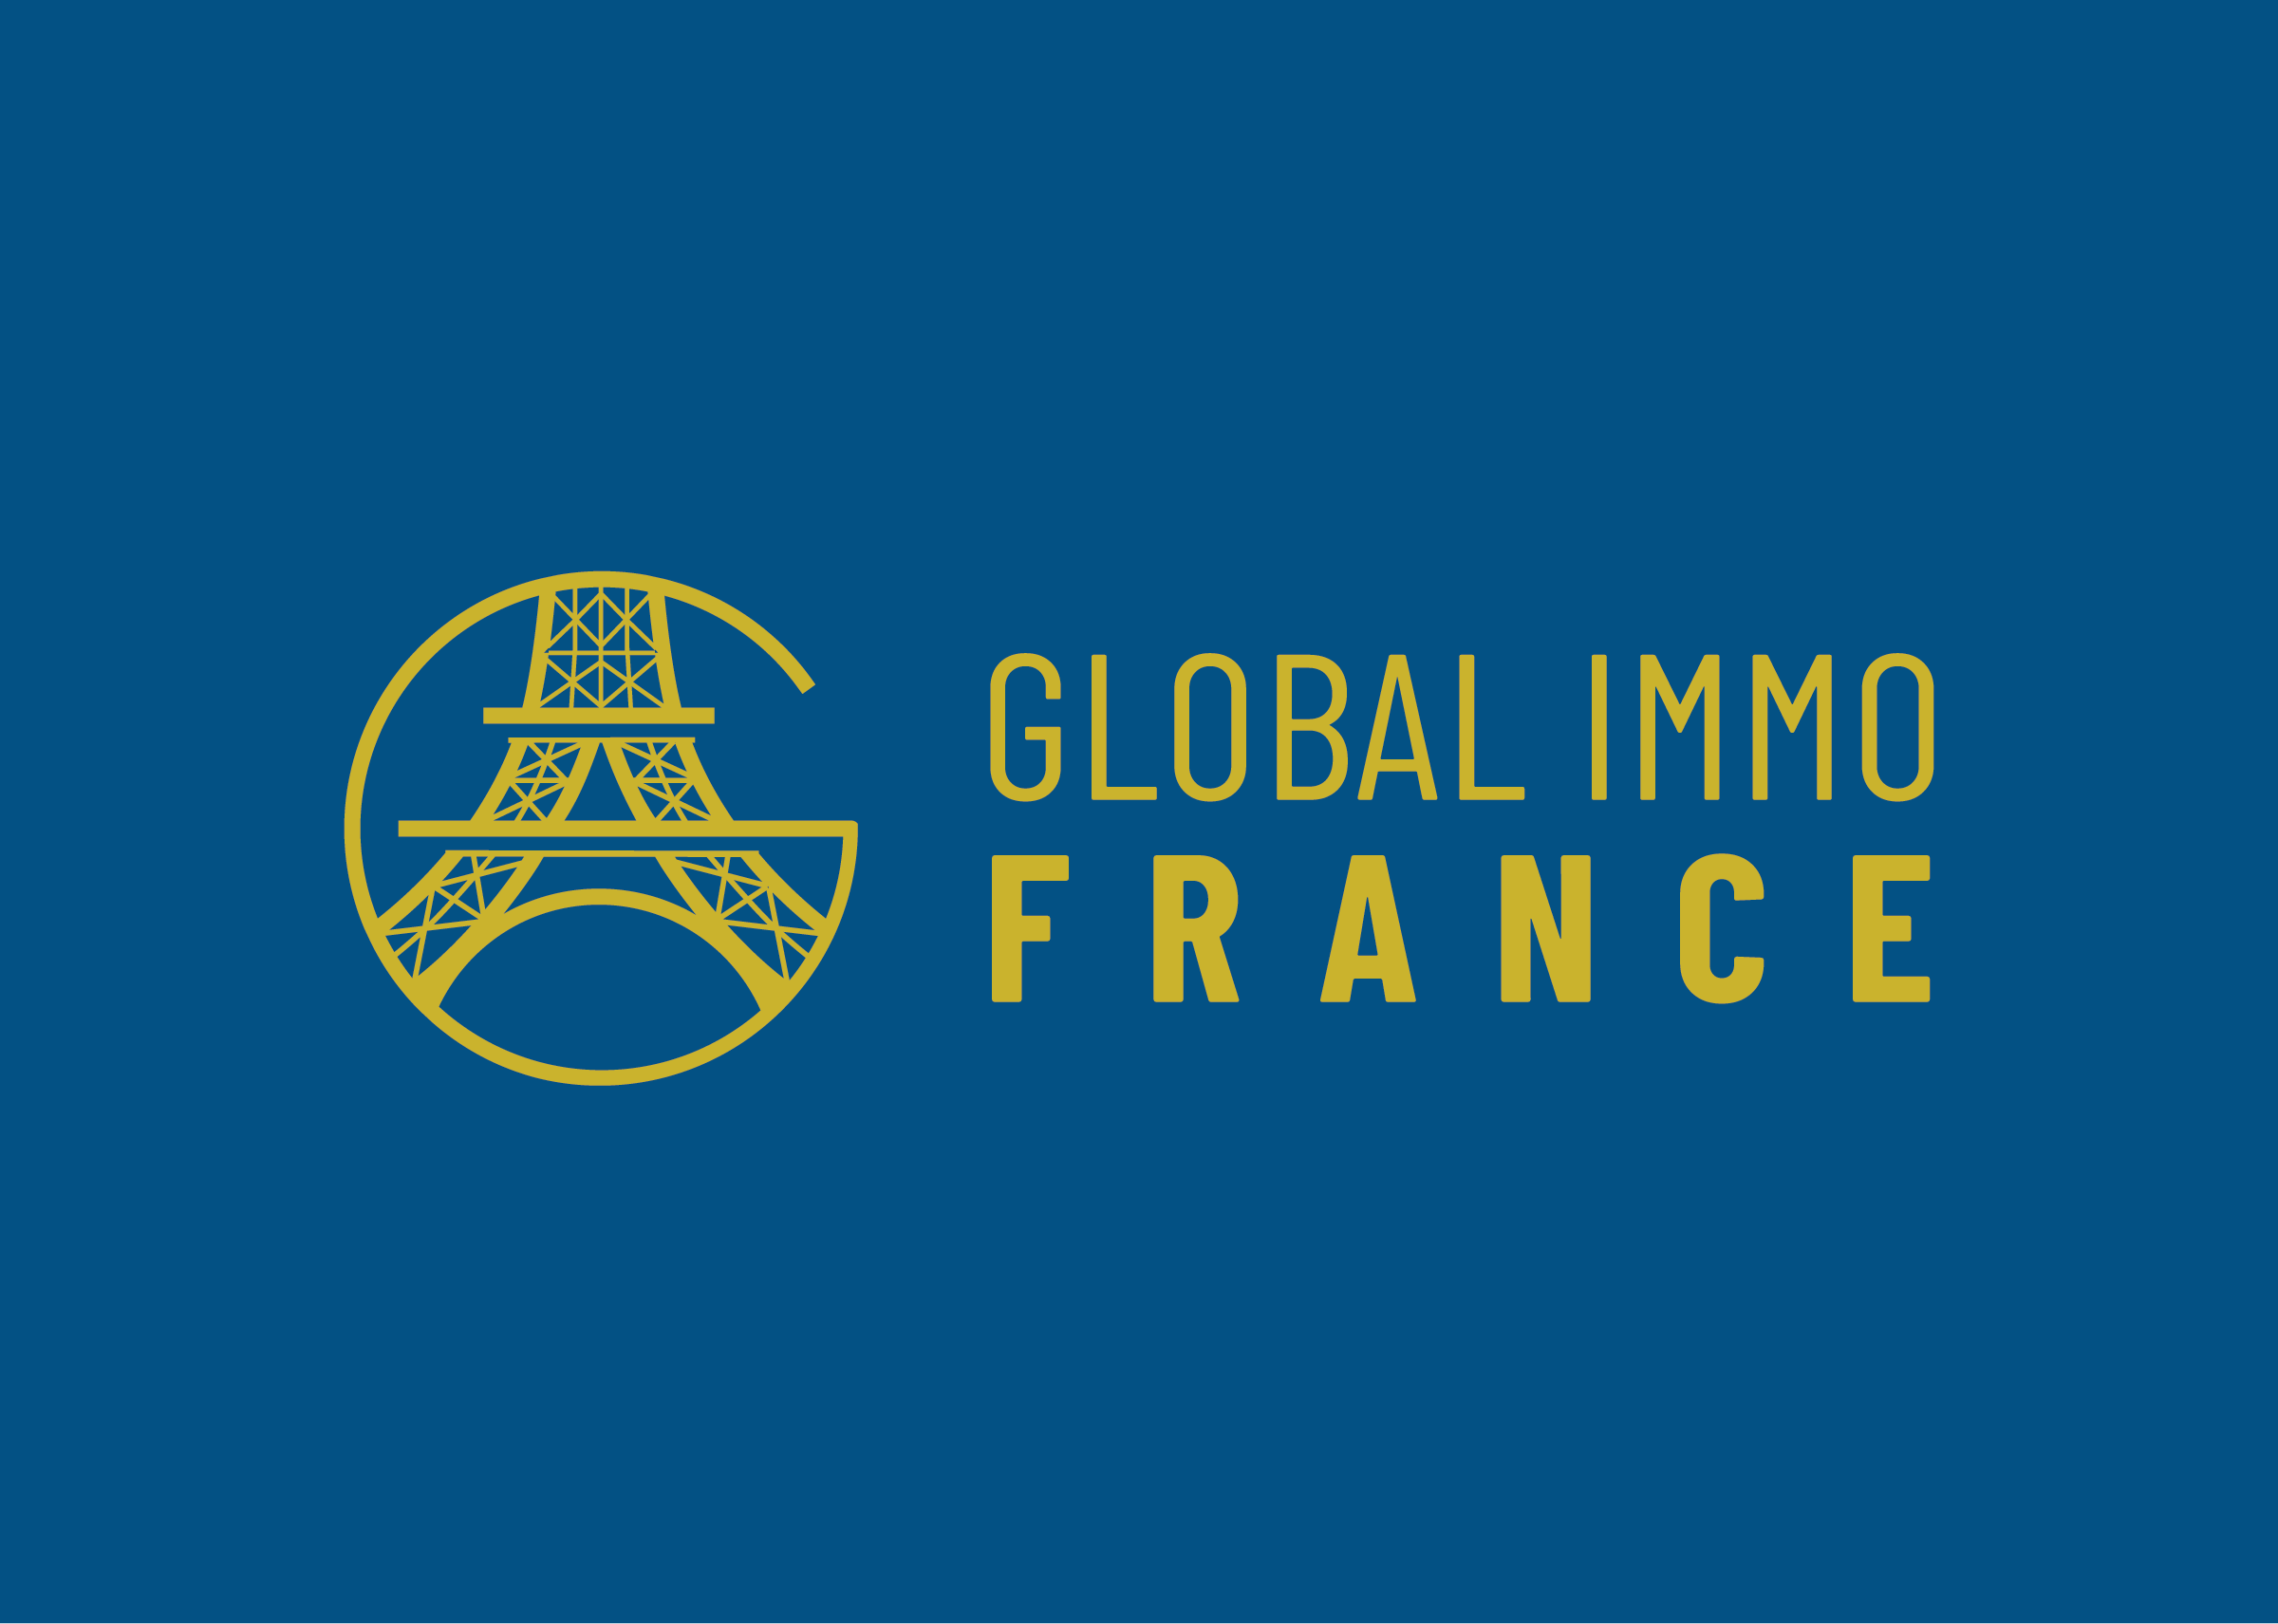 Visual Identity Design for Global Immo France